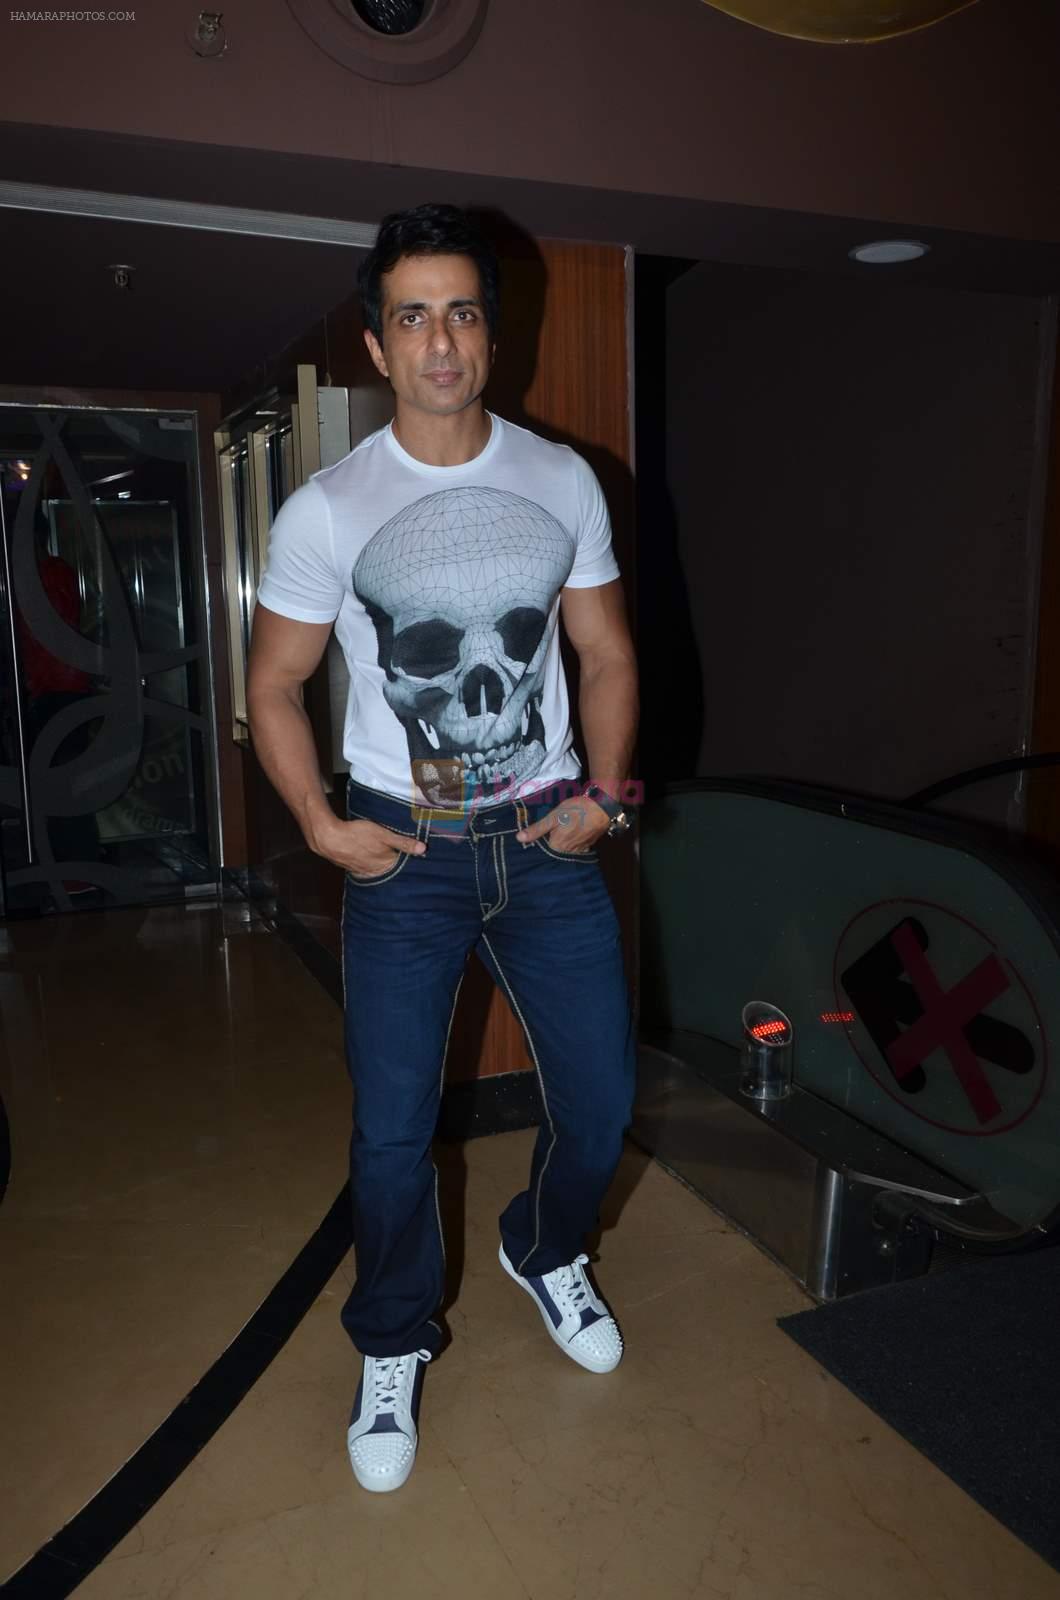 Sonu Sood at ABCD2 premiere in Mumbai on 17th June 2015